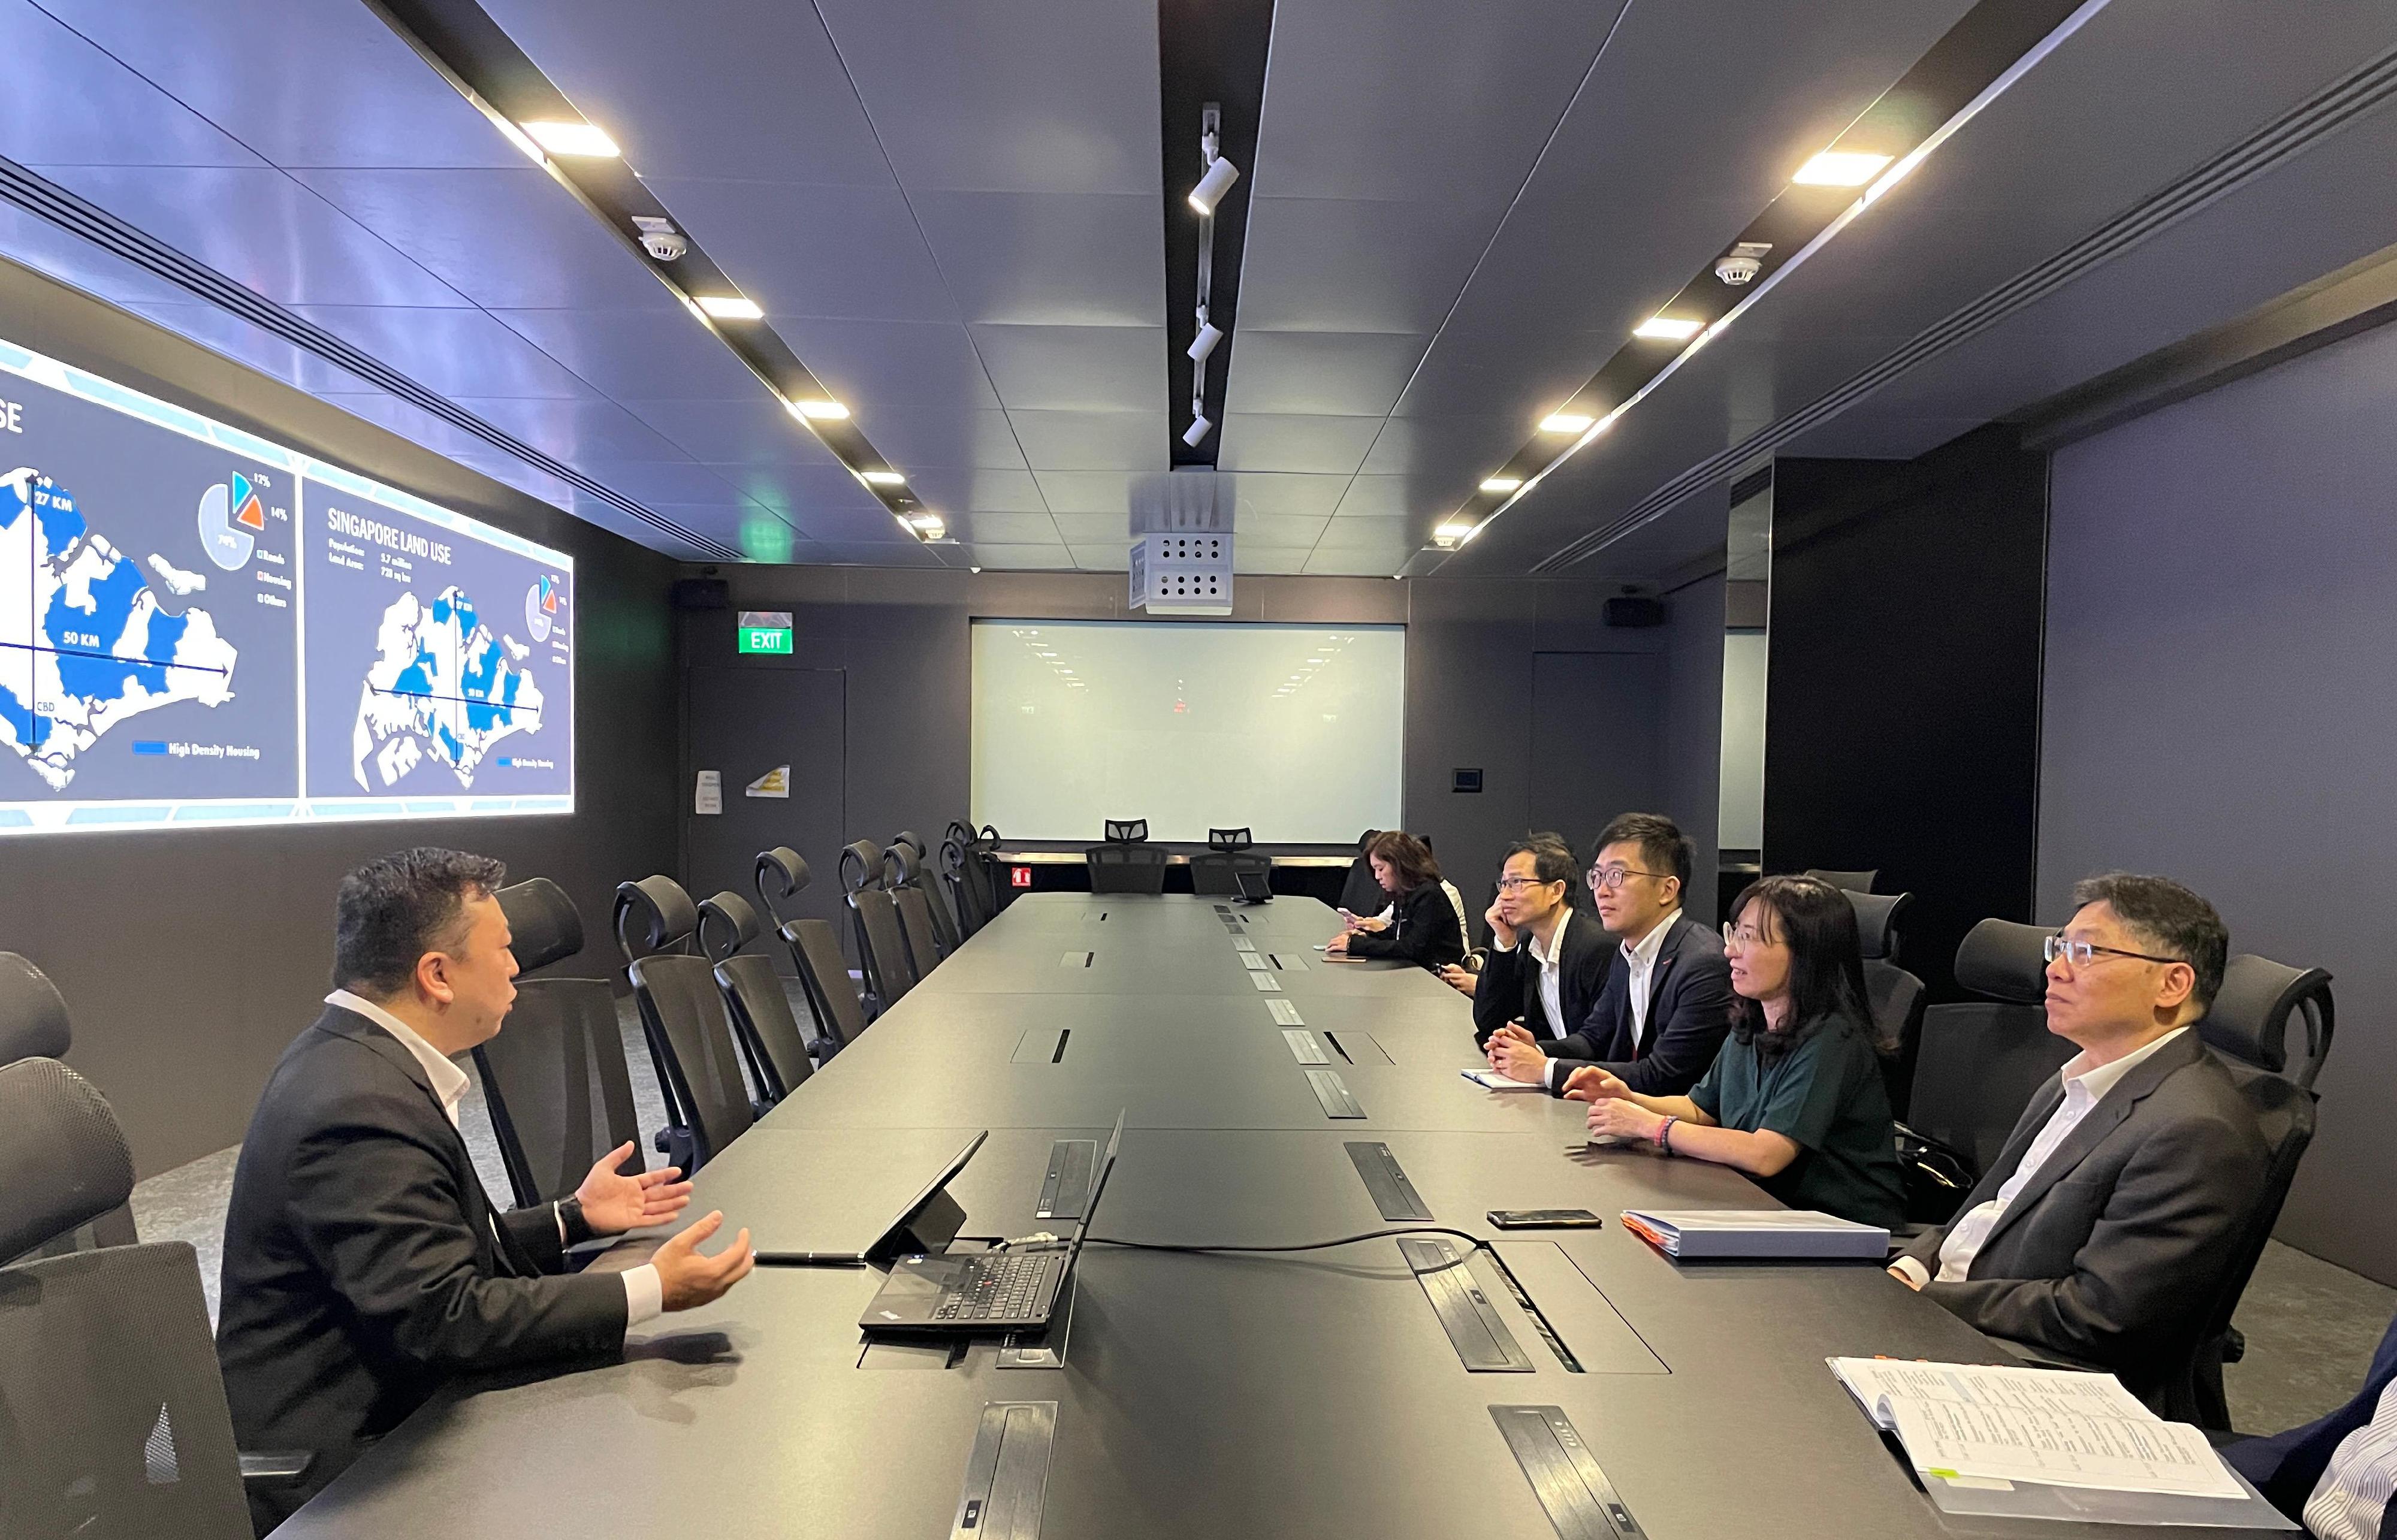 The Secretary for Transport and Logistics, Mr Lam Sai-hung, continued his visit to Singapore today (January 31). Photo shows Mr Lam (first right) paying a visit to the Intelligent Transport Systems Centre of the Land Transport Authority to understand the challenges in Singapore's urban traffic management.